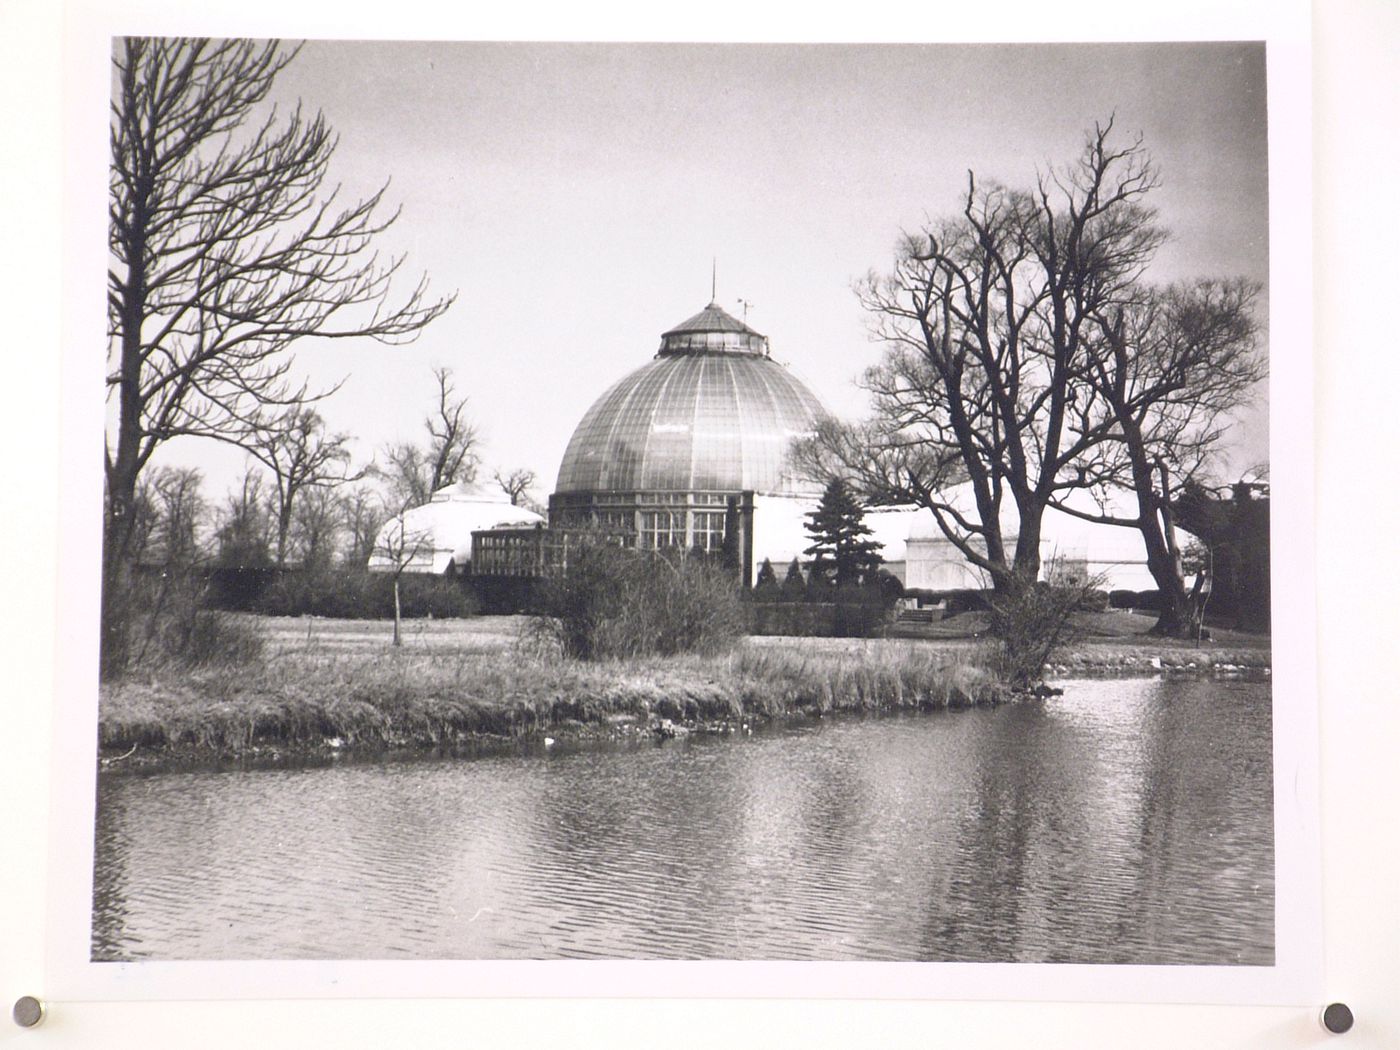 View of the Belle Isle Park Conservatory (also known as the Aquarium and Horticulture Building) from across the Detroit River, Detroit, Michigan